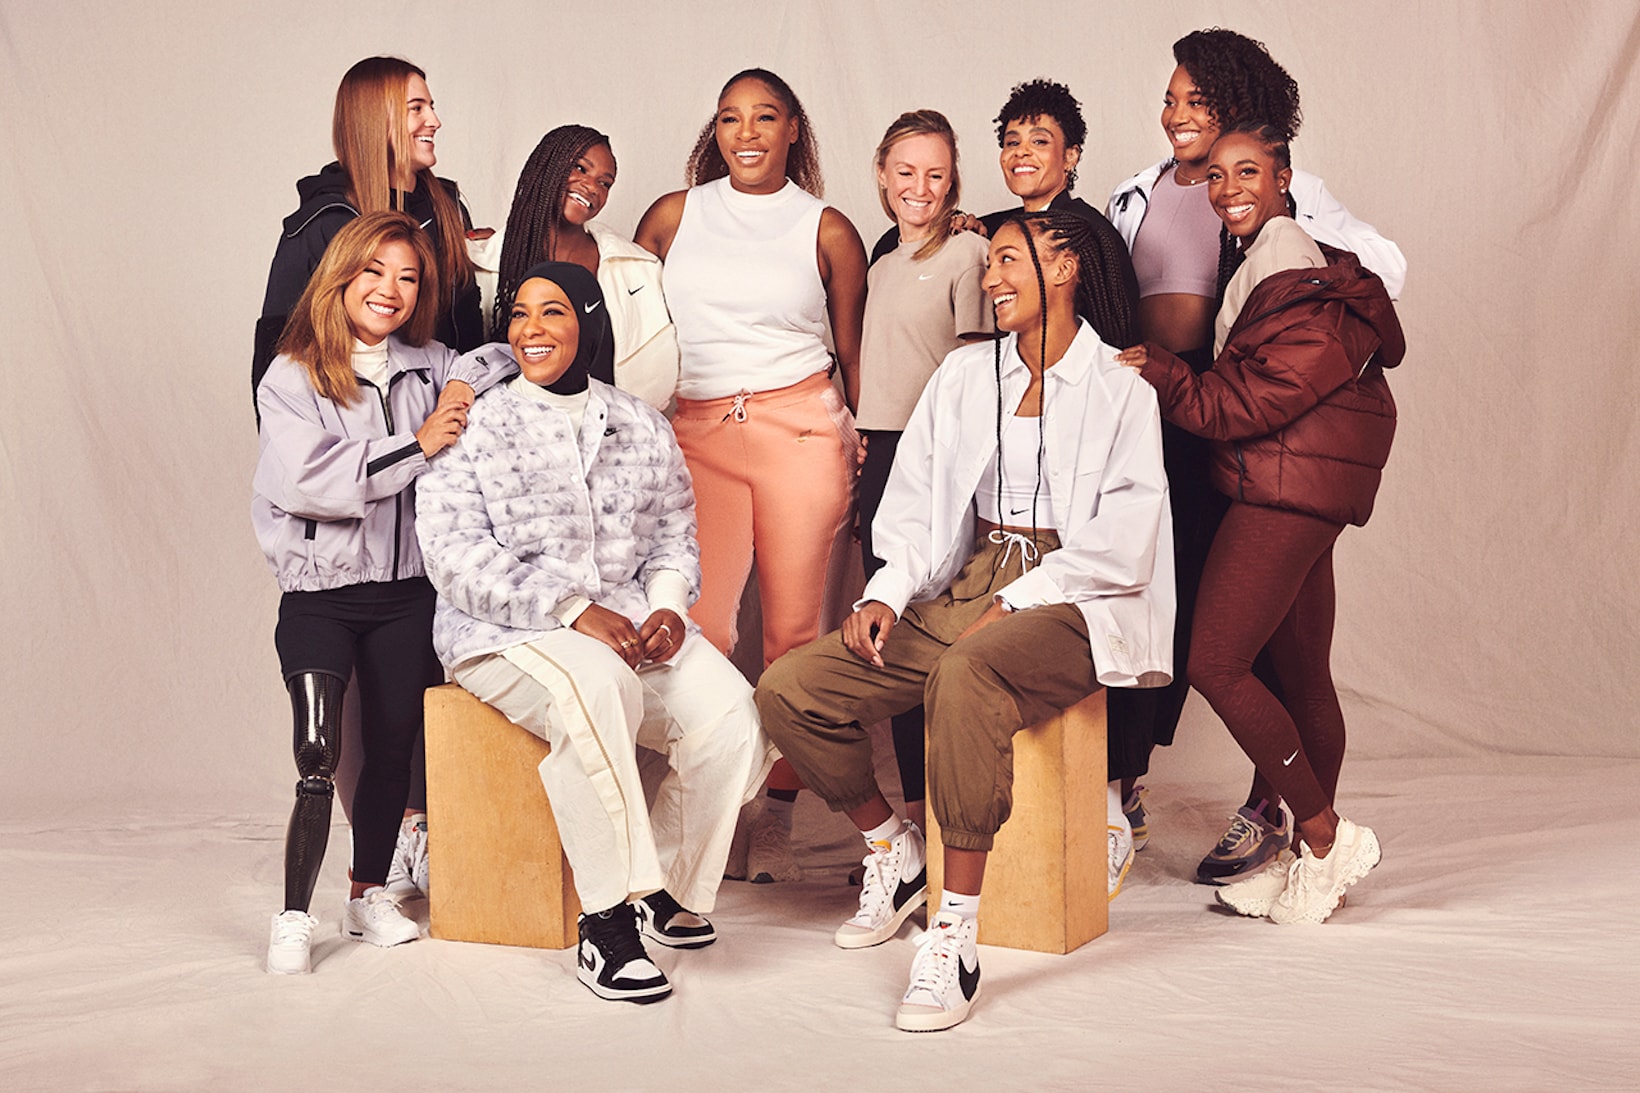 Nike Think Tank Collective Women Athletes